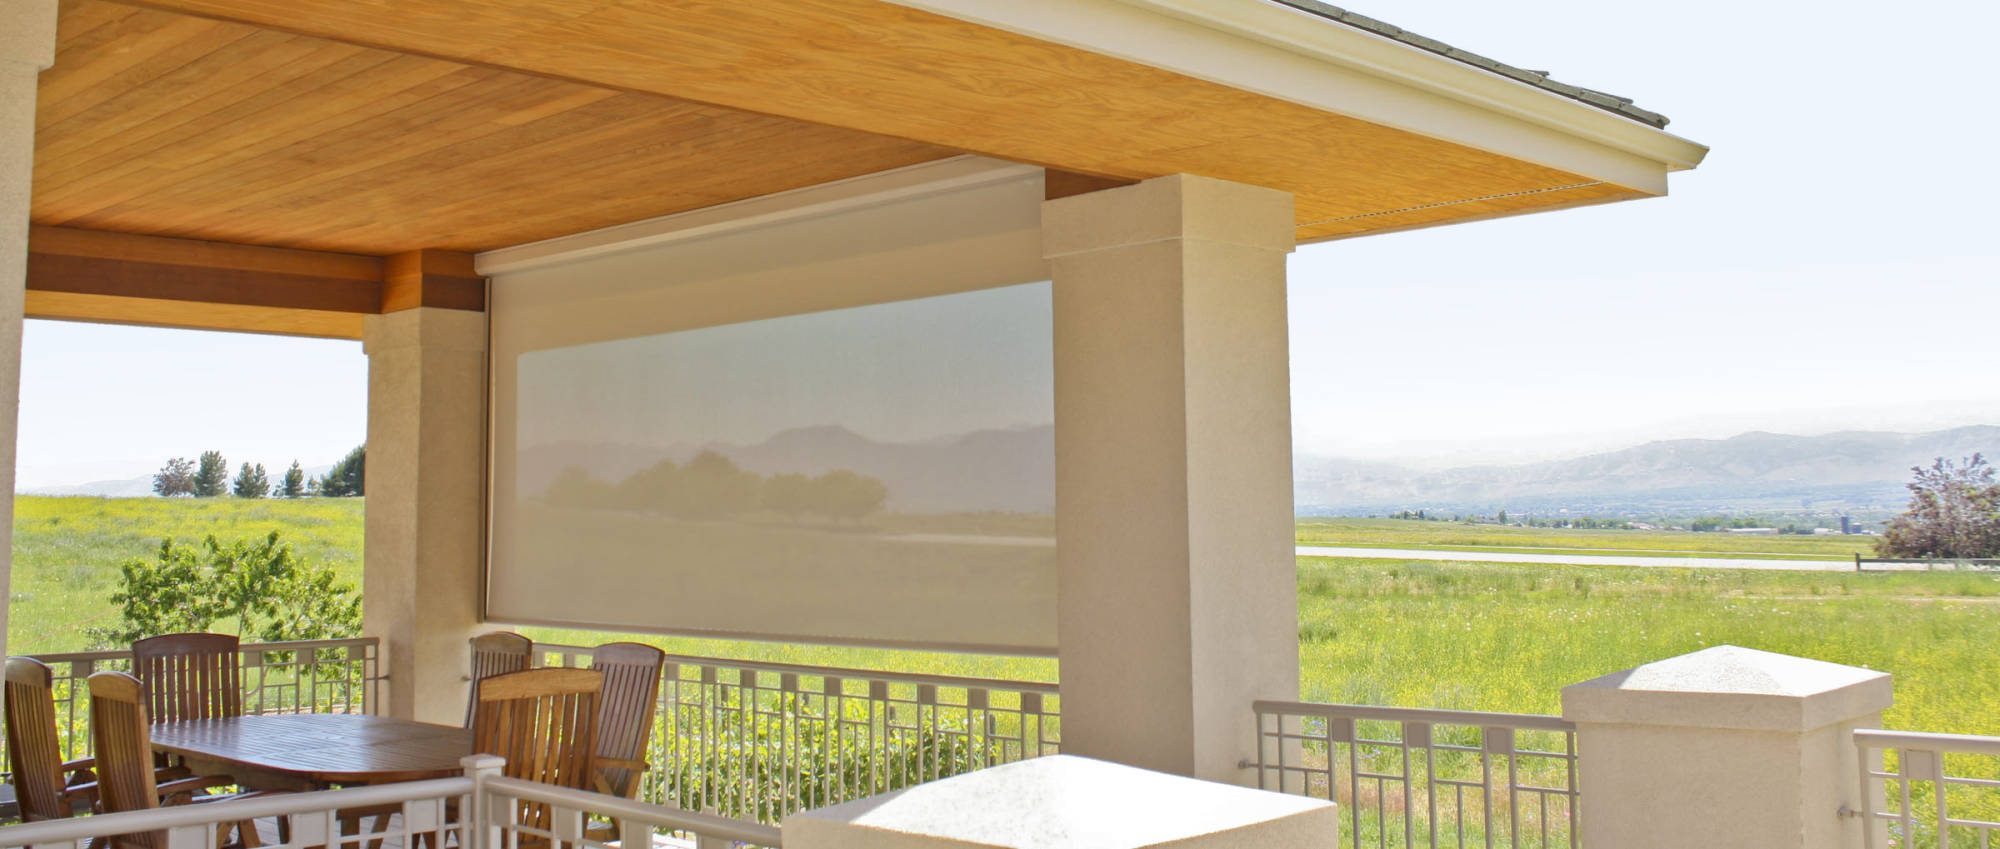 Oasis 2800 Patio Shade front range view